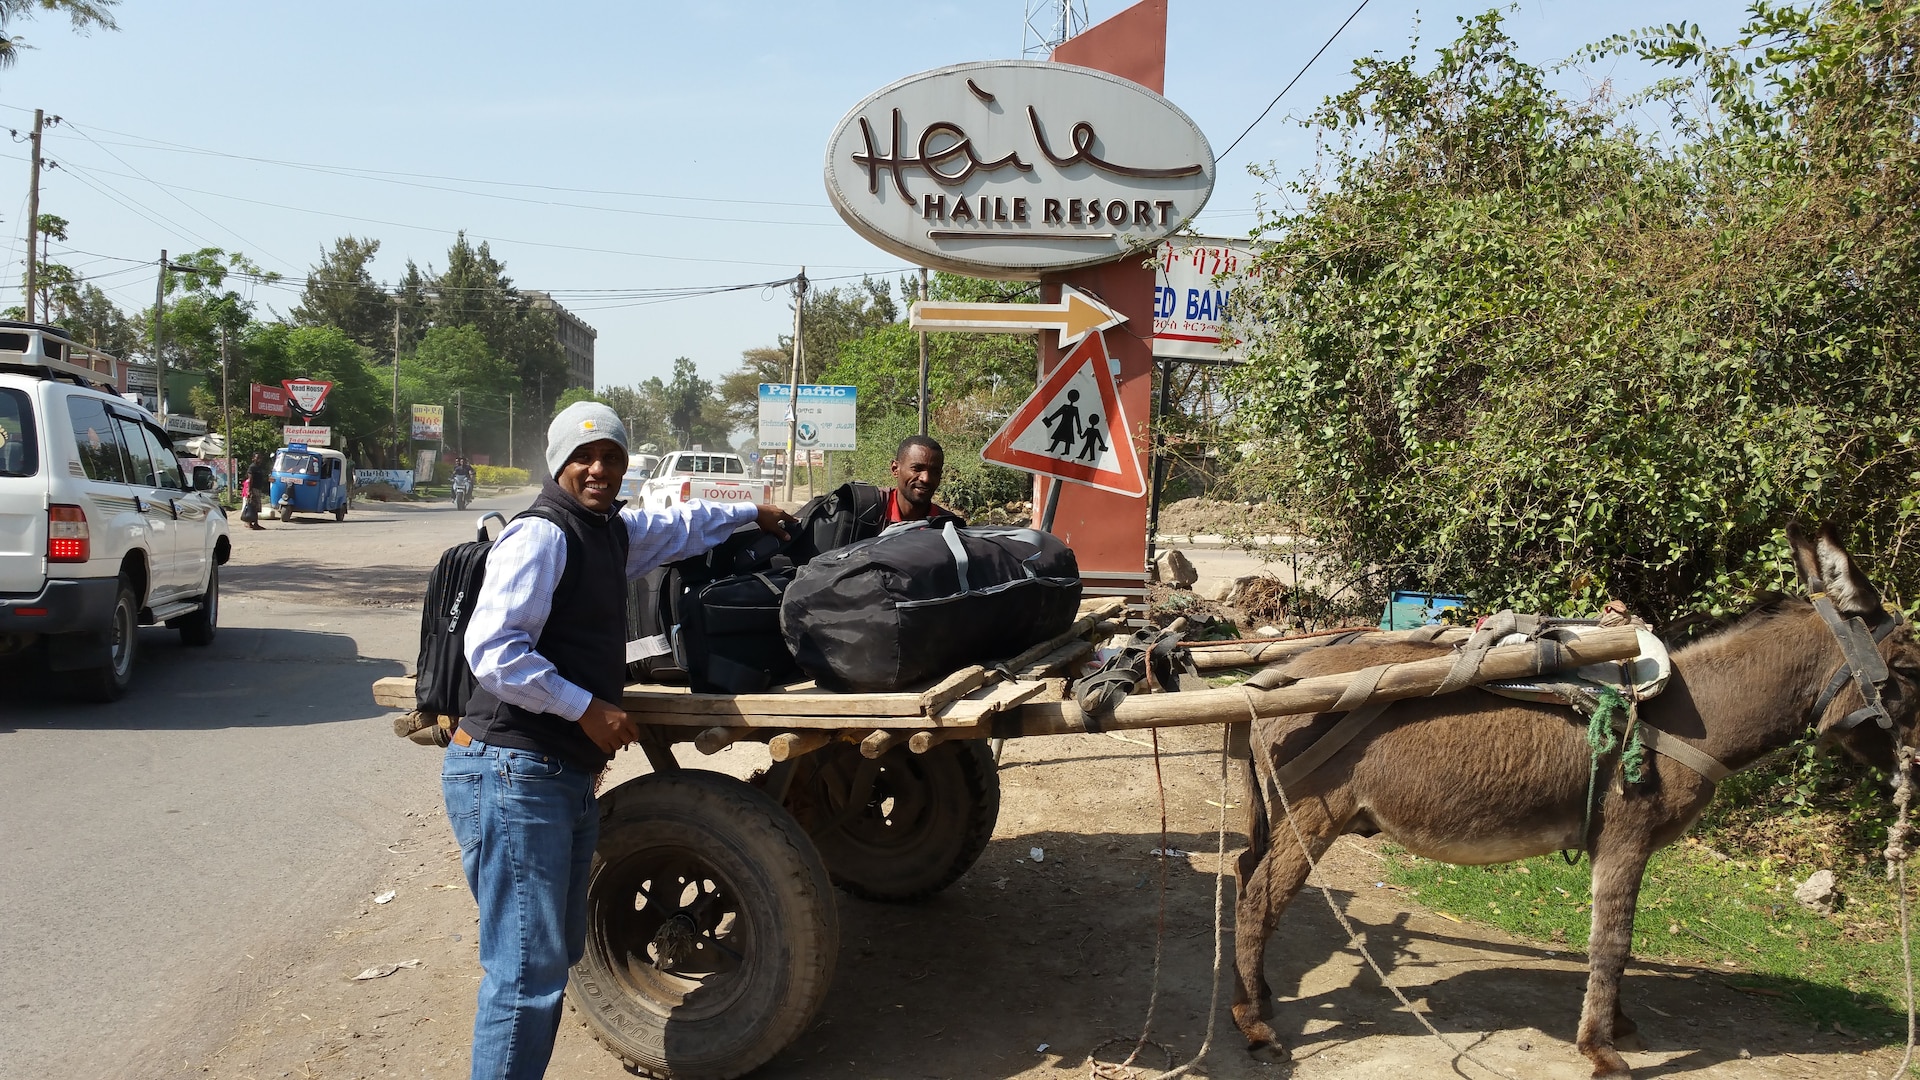 Yared Amanuel, right, retrieves his luggage after his arrival in Hawassa, Ethiopia, on March 9, 2018. Amanuel, an engineer at Naval Surface Warfare Center, Carderock Division, was in Ethiopia on personal travel to help run his non-profit organization, EthioAthletics, which he normally does from his home in Maryland.